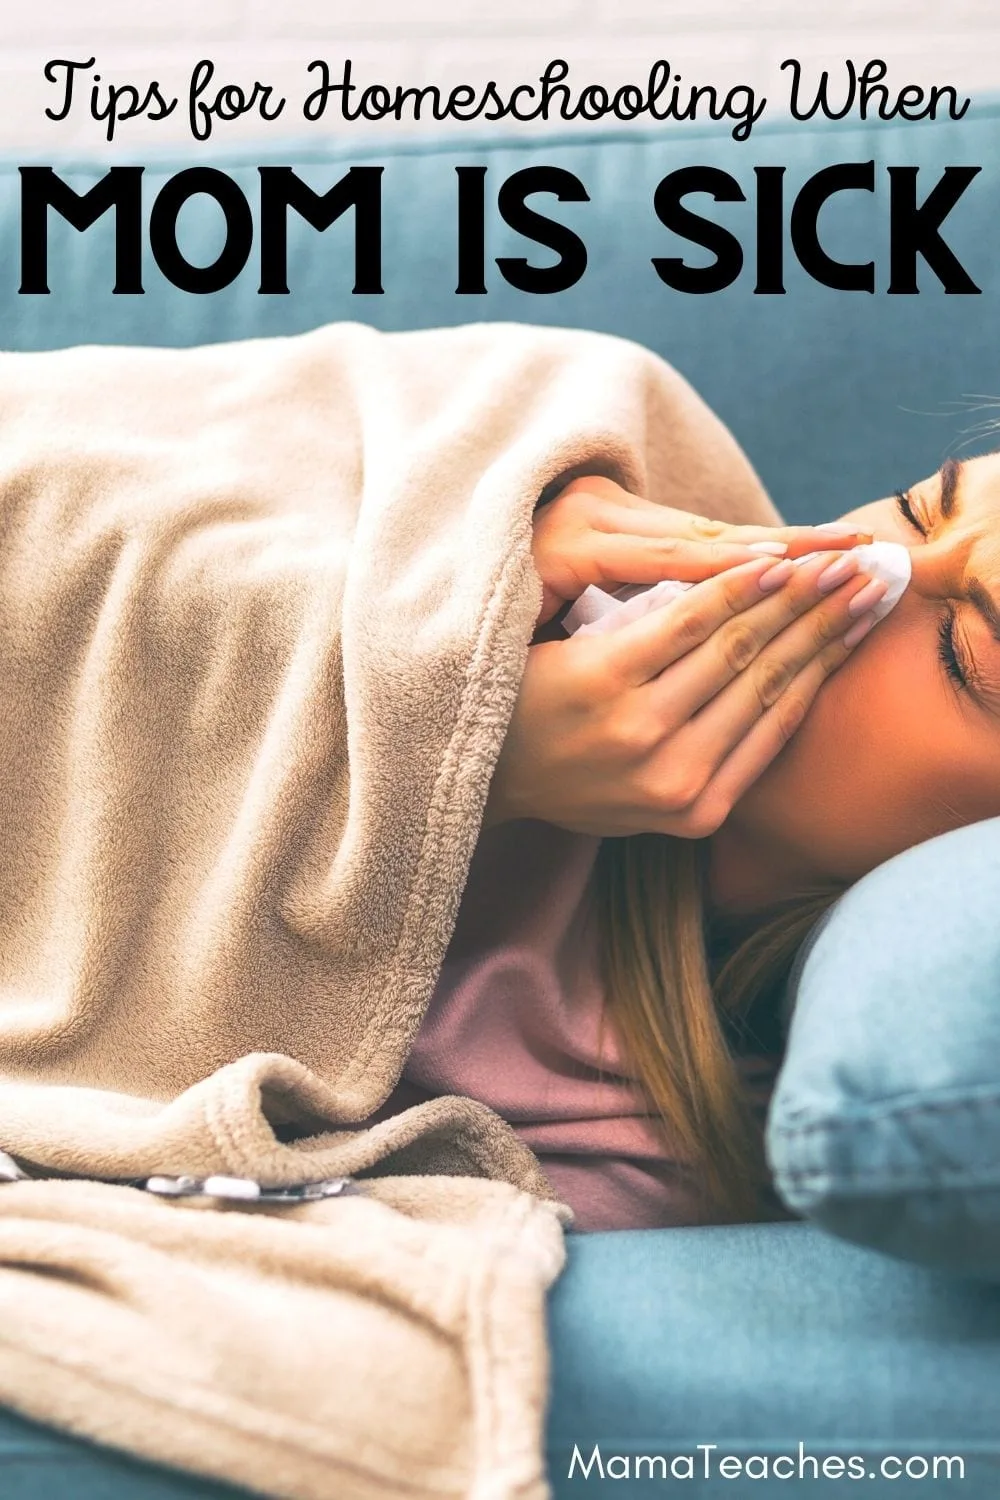 Tips for Homeschooling When Mom is Sick